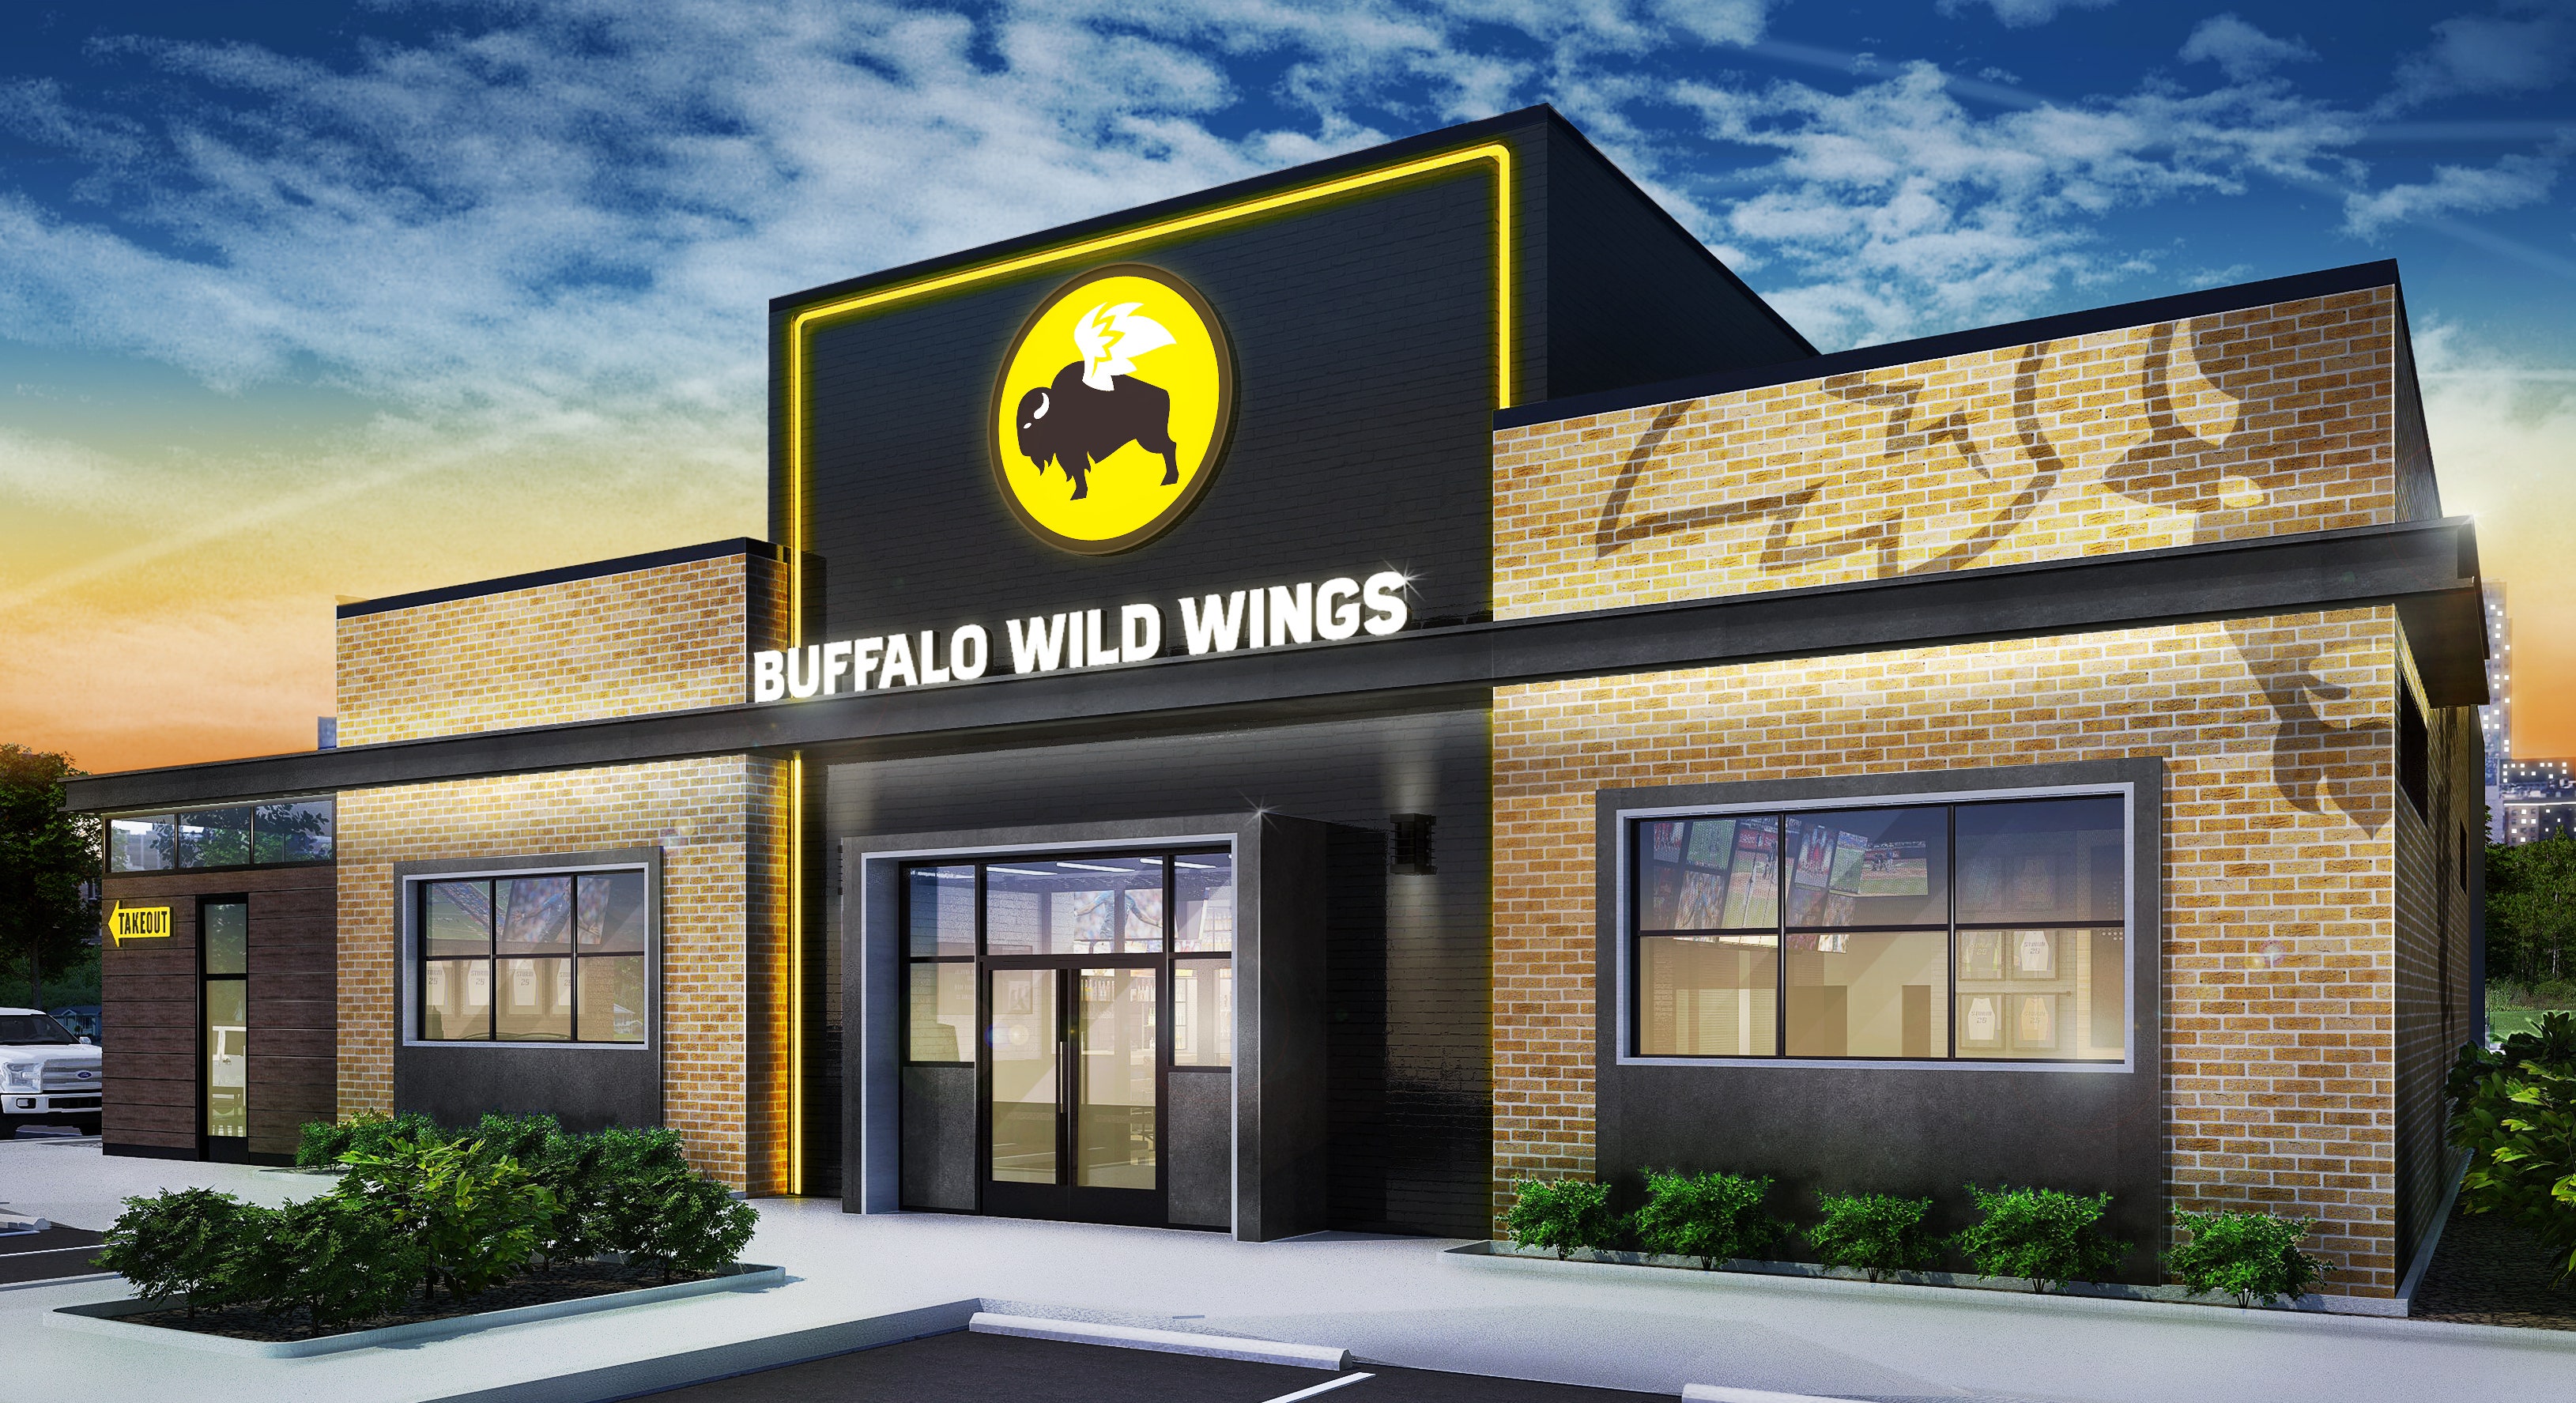 Wings On Sale: ICV Partners To Acquire Diversified Restaurant Holdings